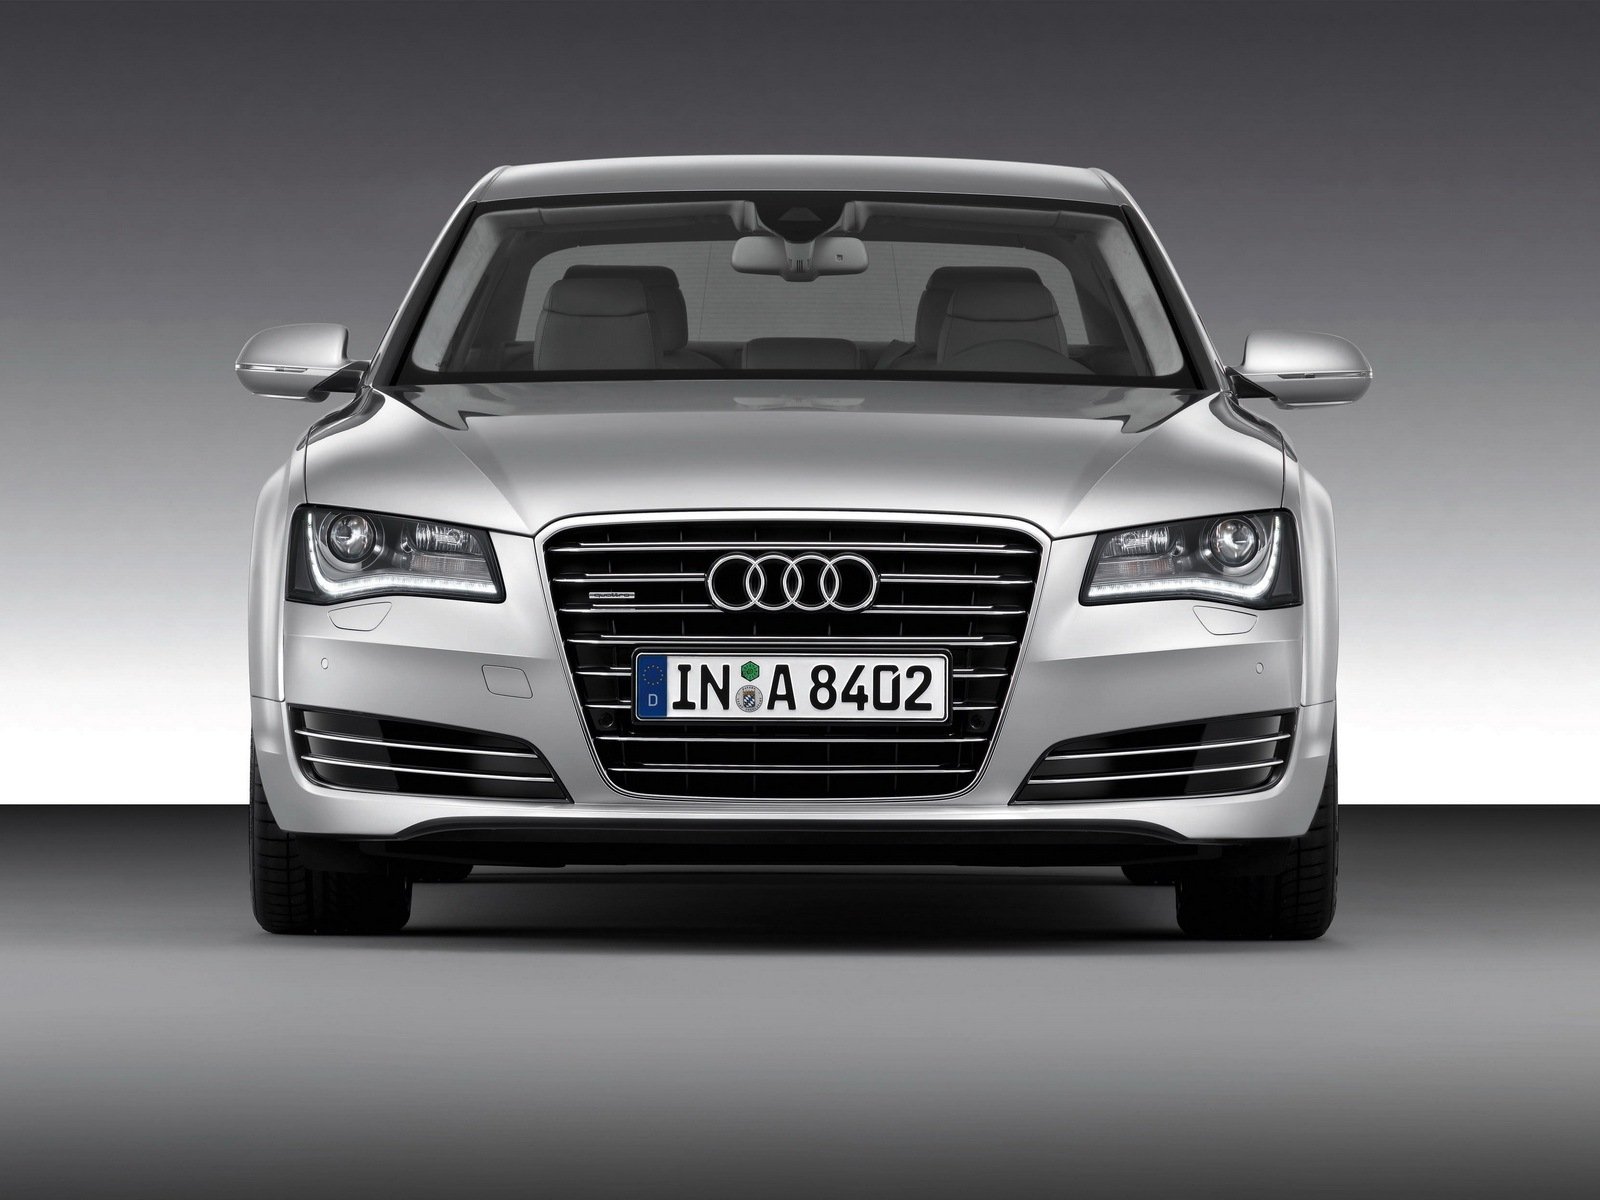 Audi A8 photos and wallpapers   tuningnewsnet